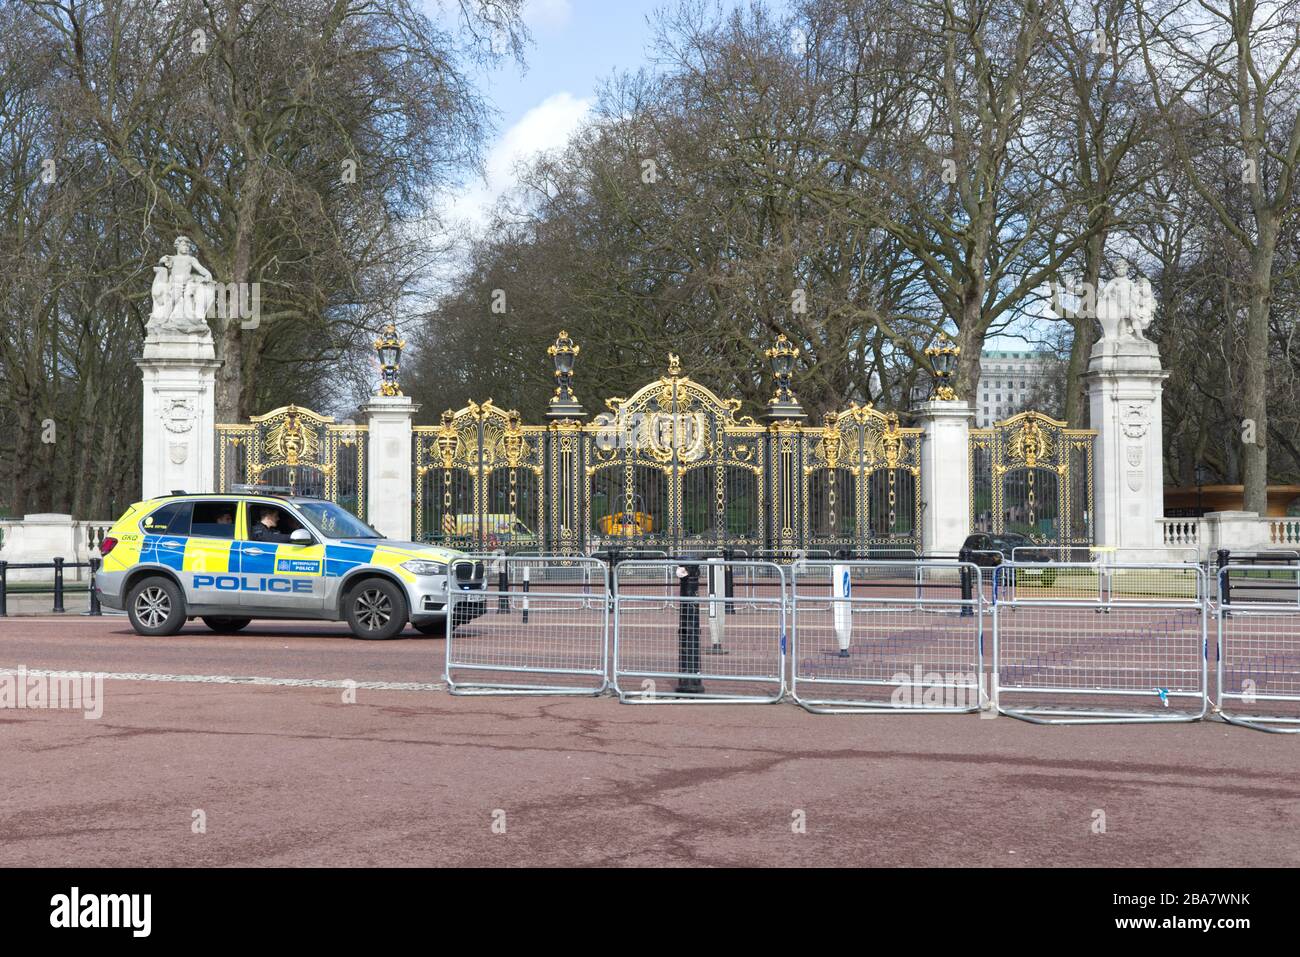 Policing the empty streets of London amid the outbreak of Covid 19, Canada Gate London Stock Photo